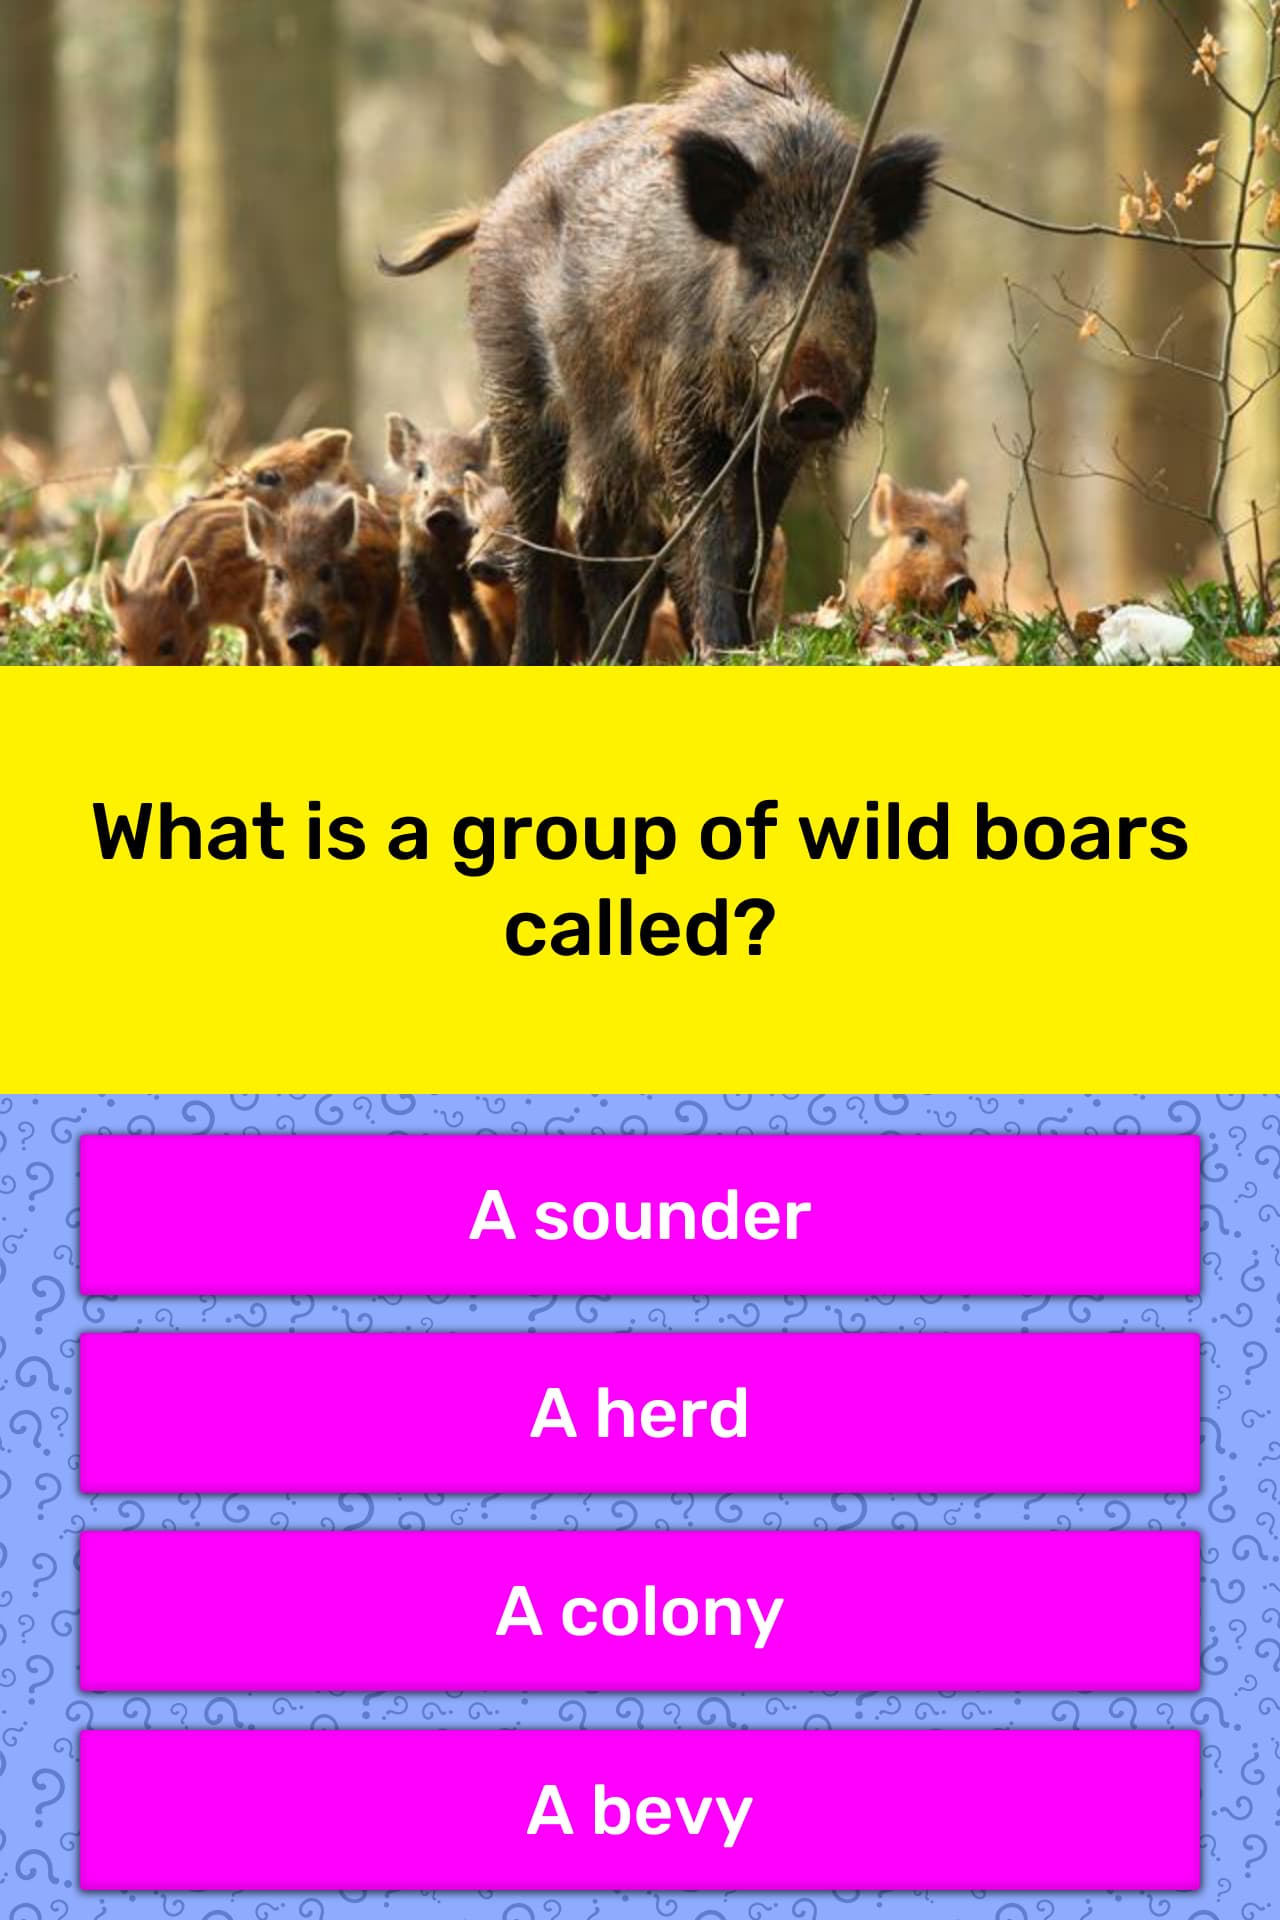 What is a group of boars called?